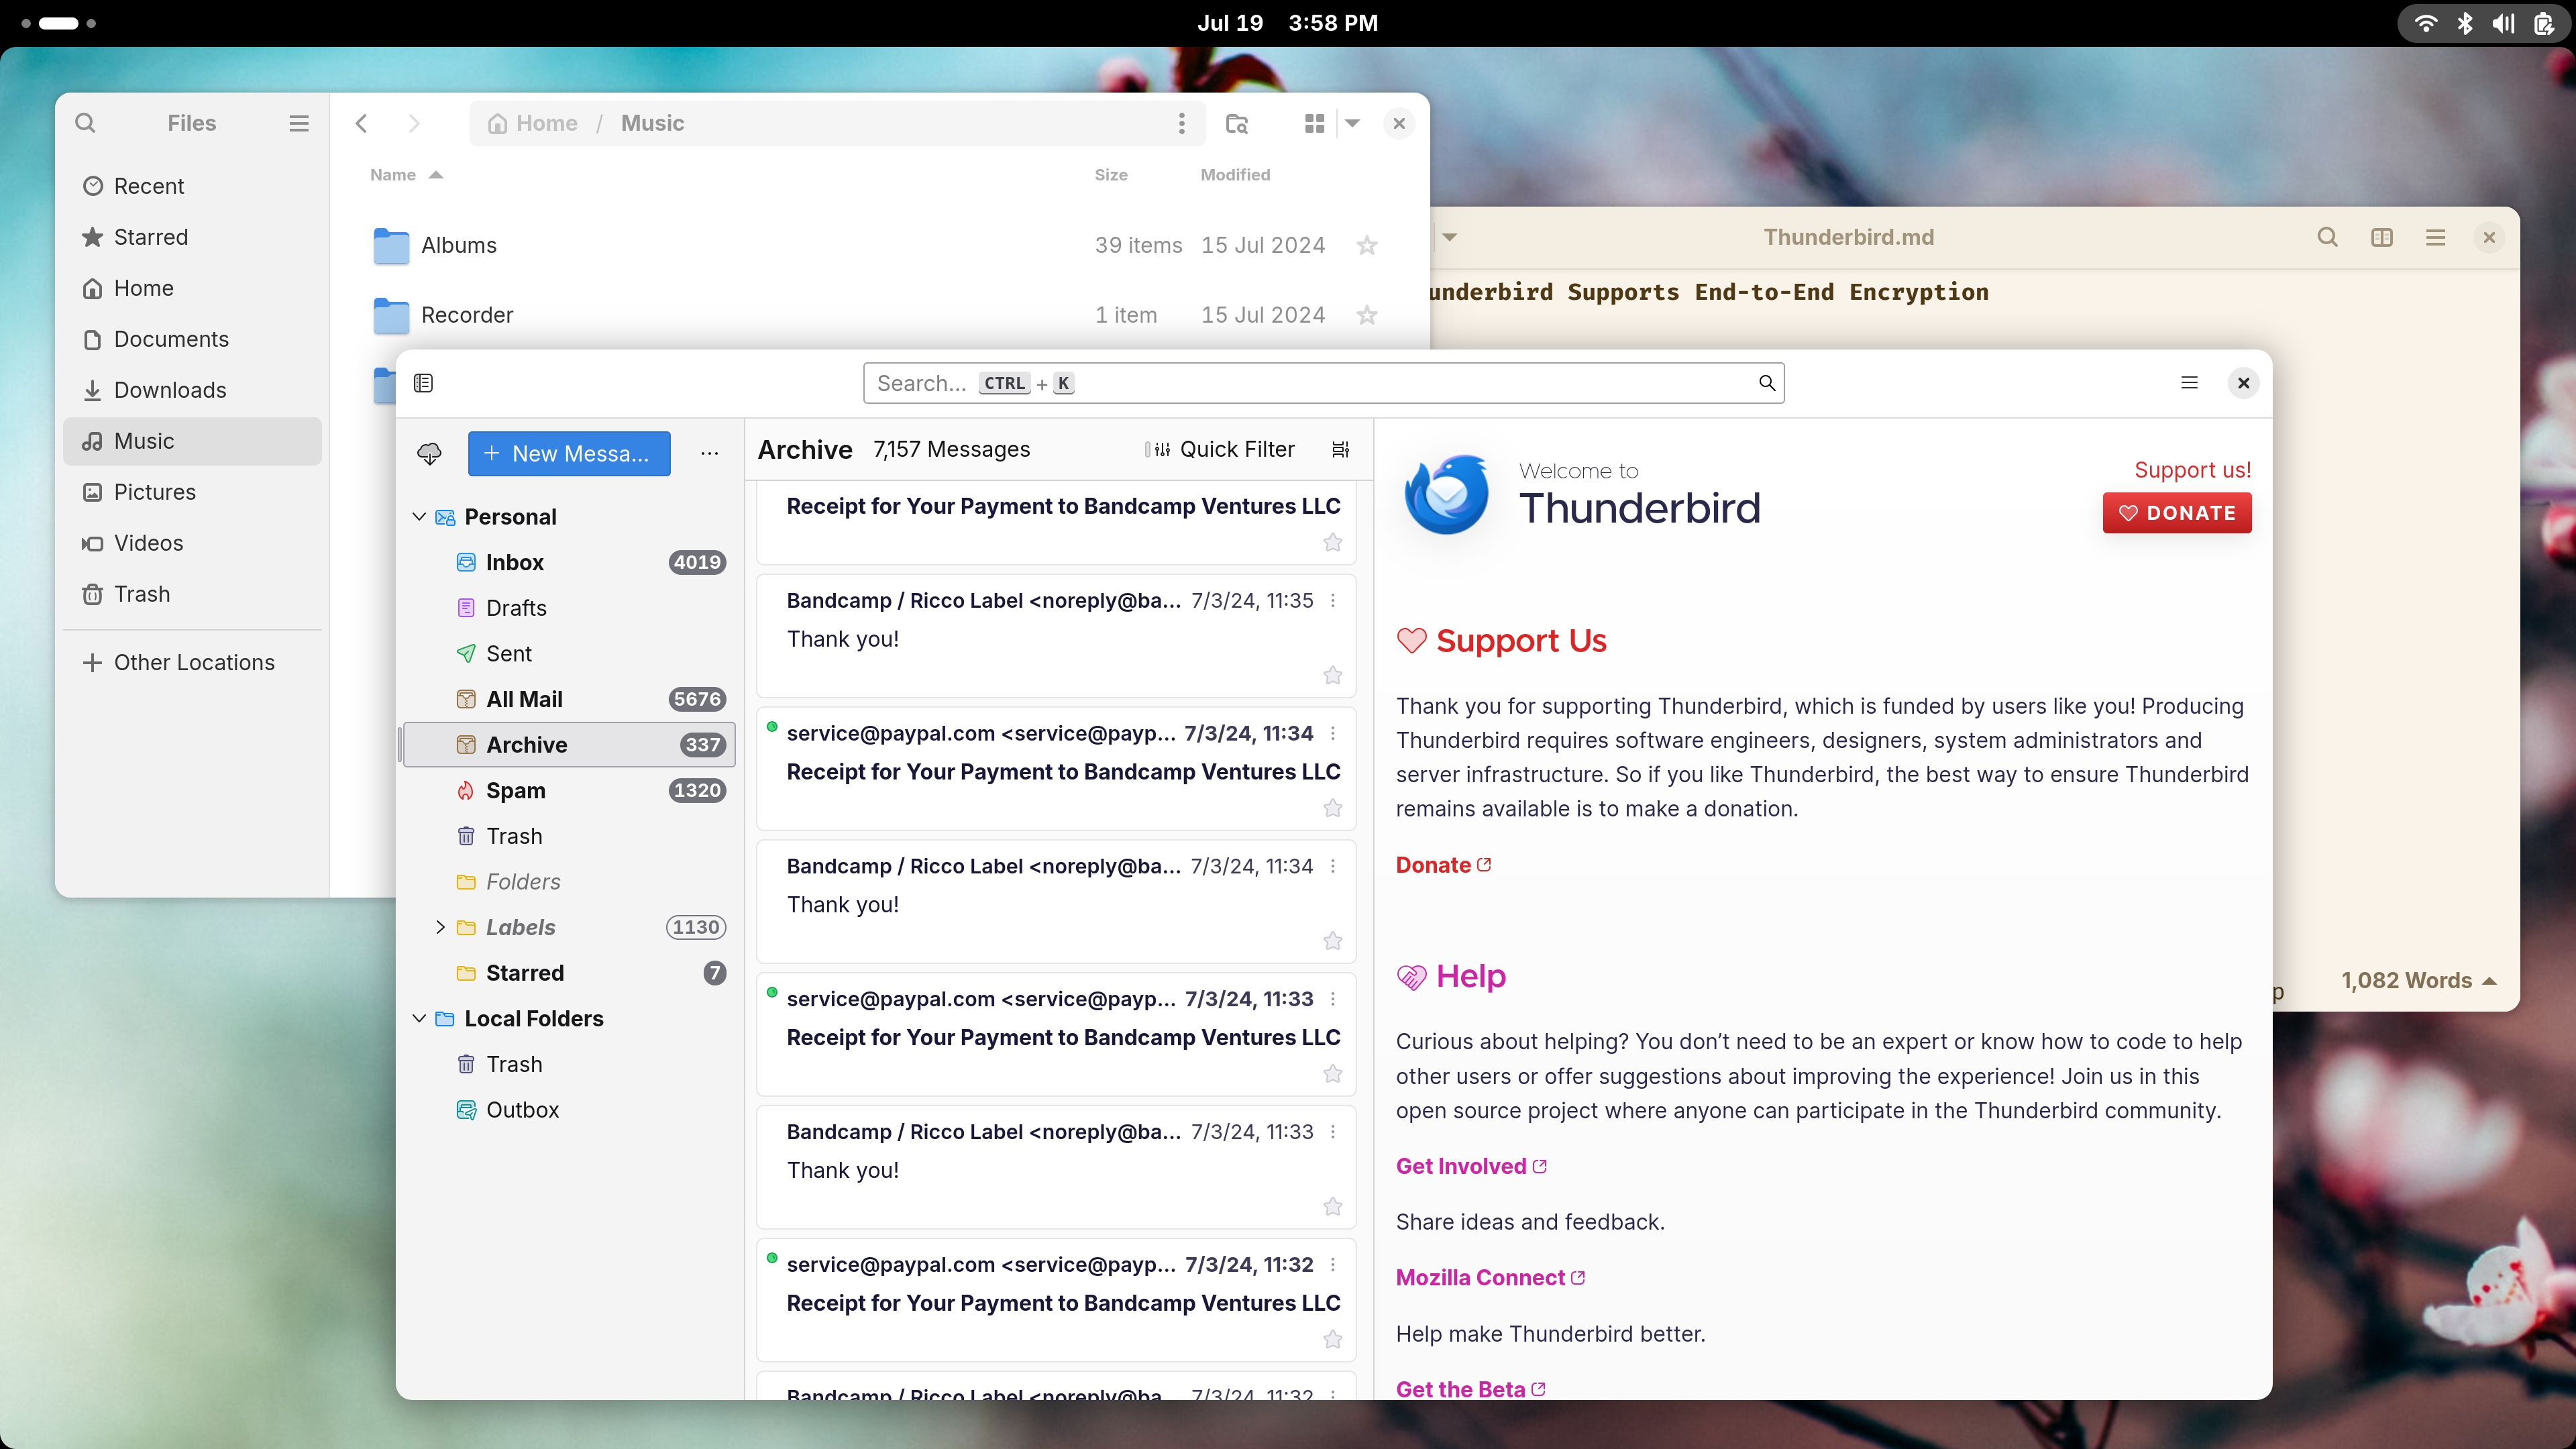 GNOME desktop with Thunderbird email client open alongside other apps.